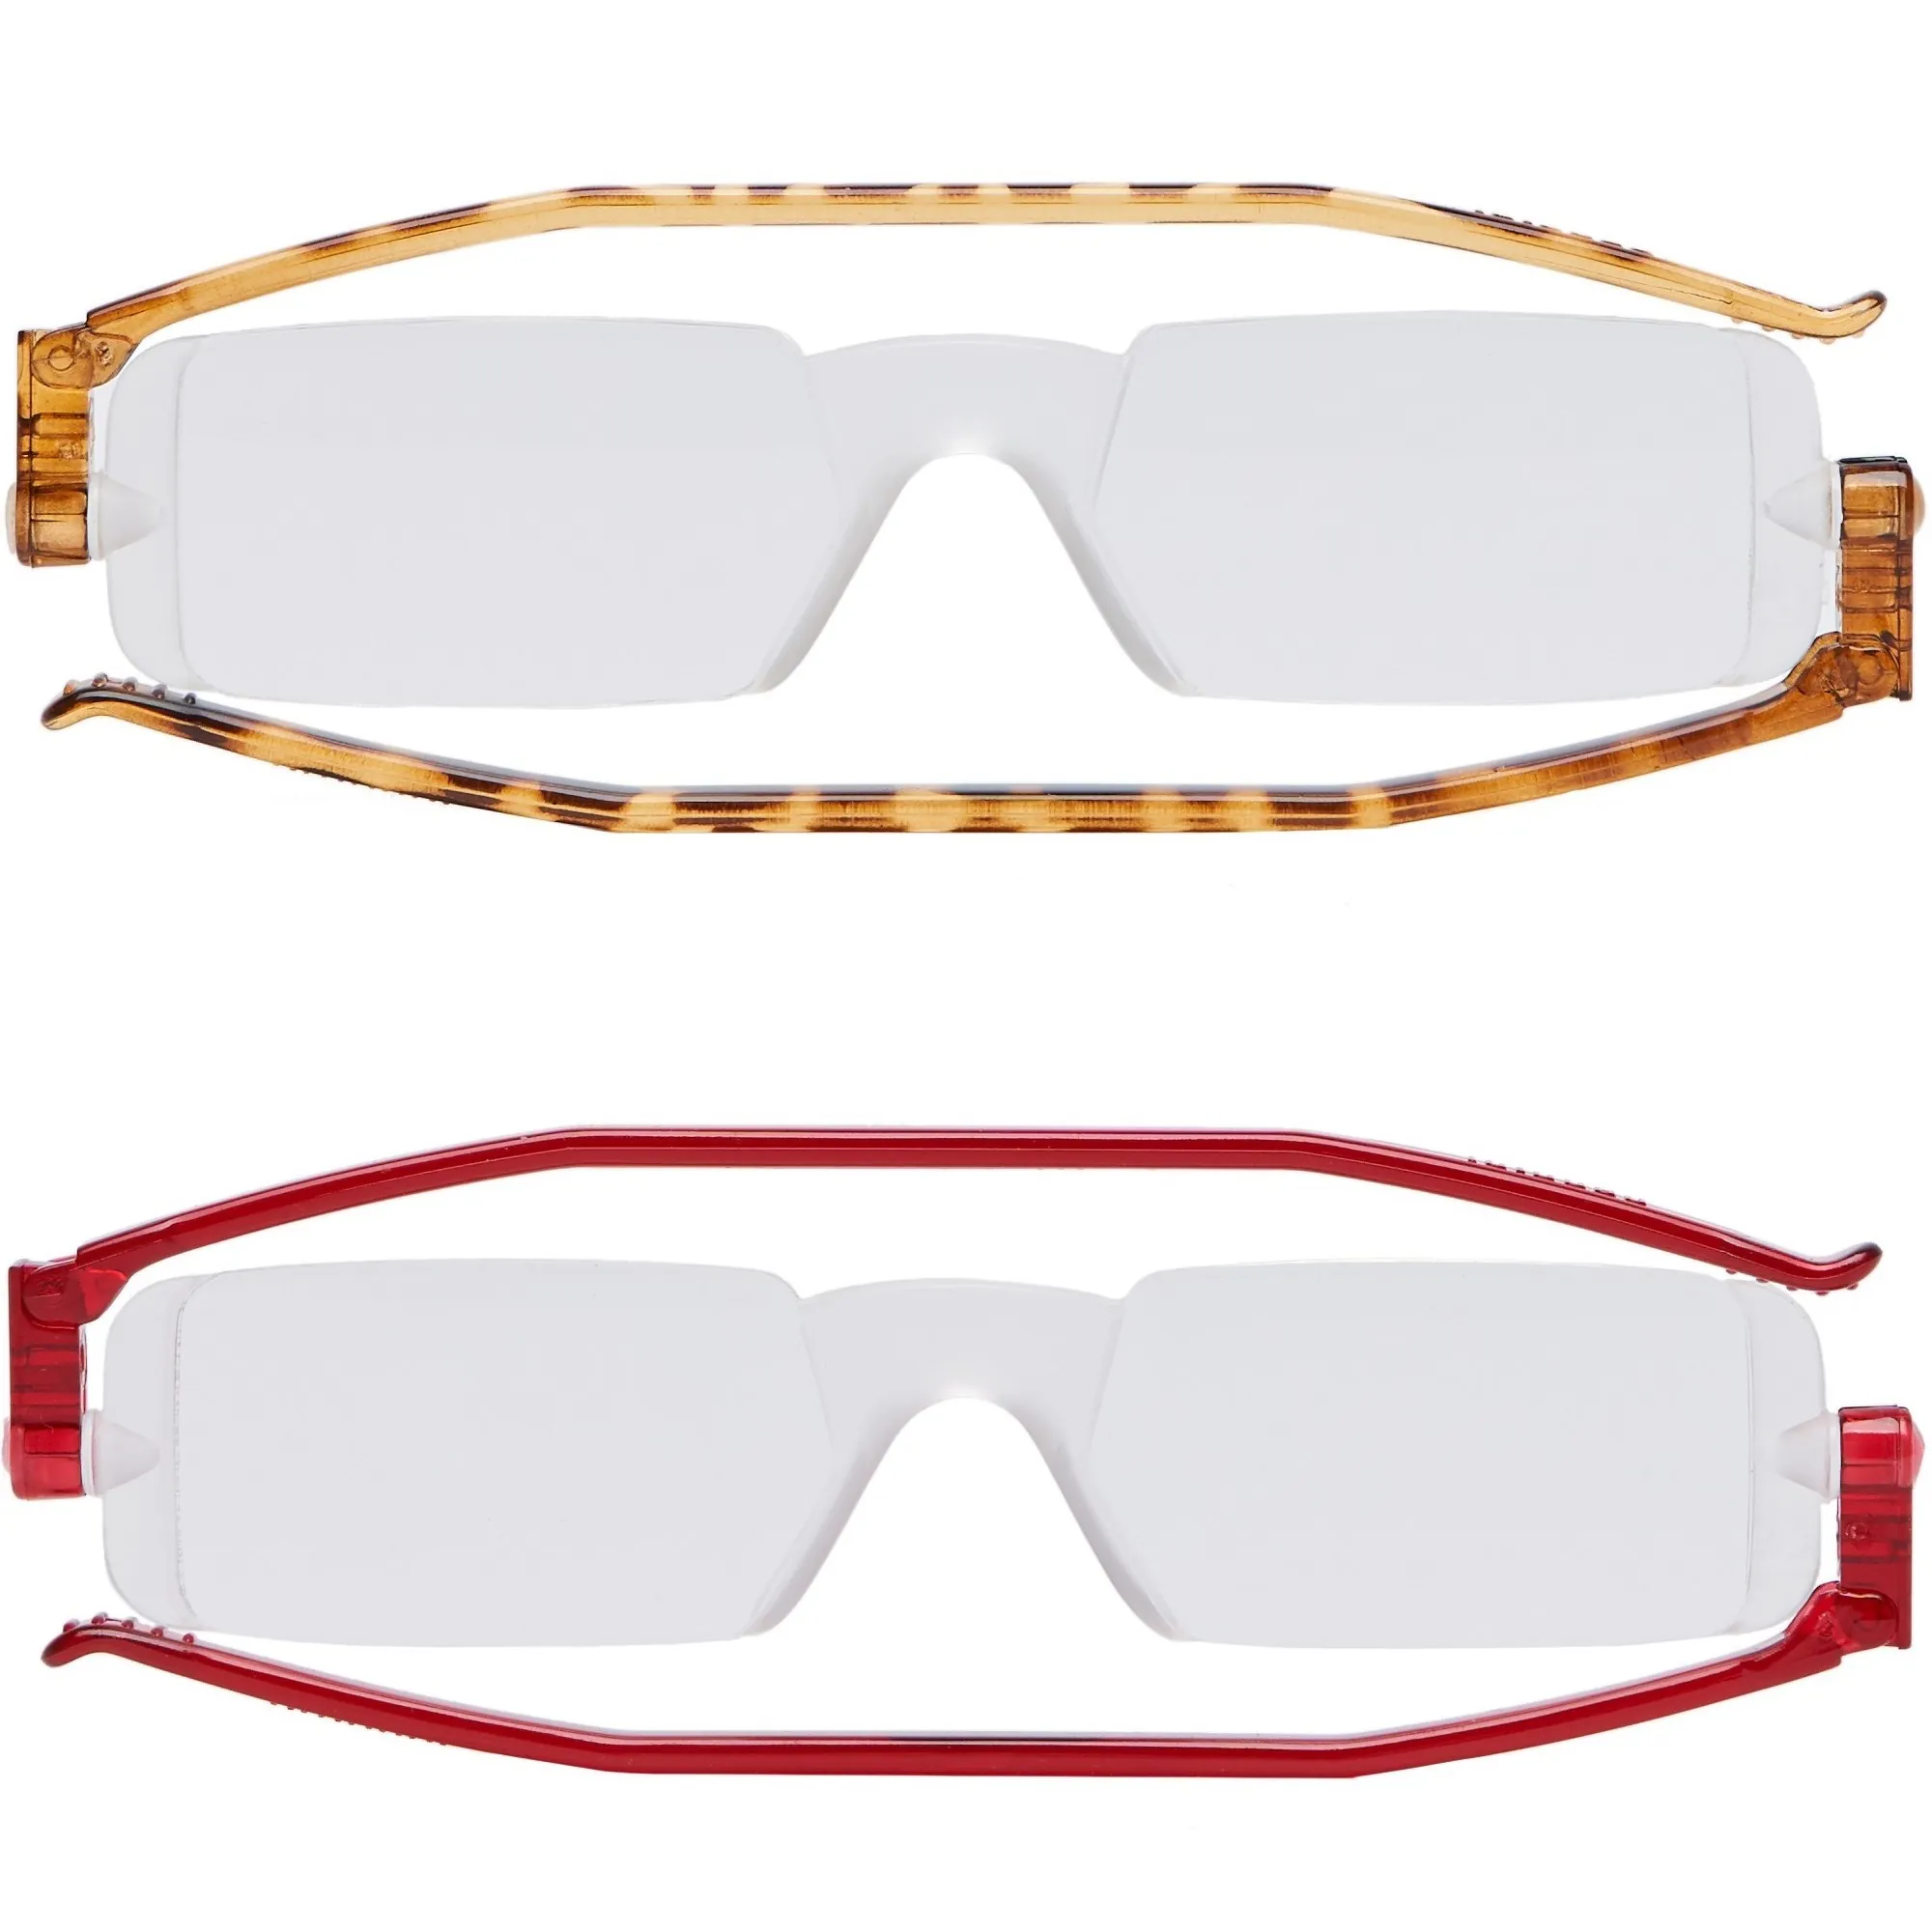 Ultra-Thin-Reading-Glasses-Compact-1 Tortoise-Red